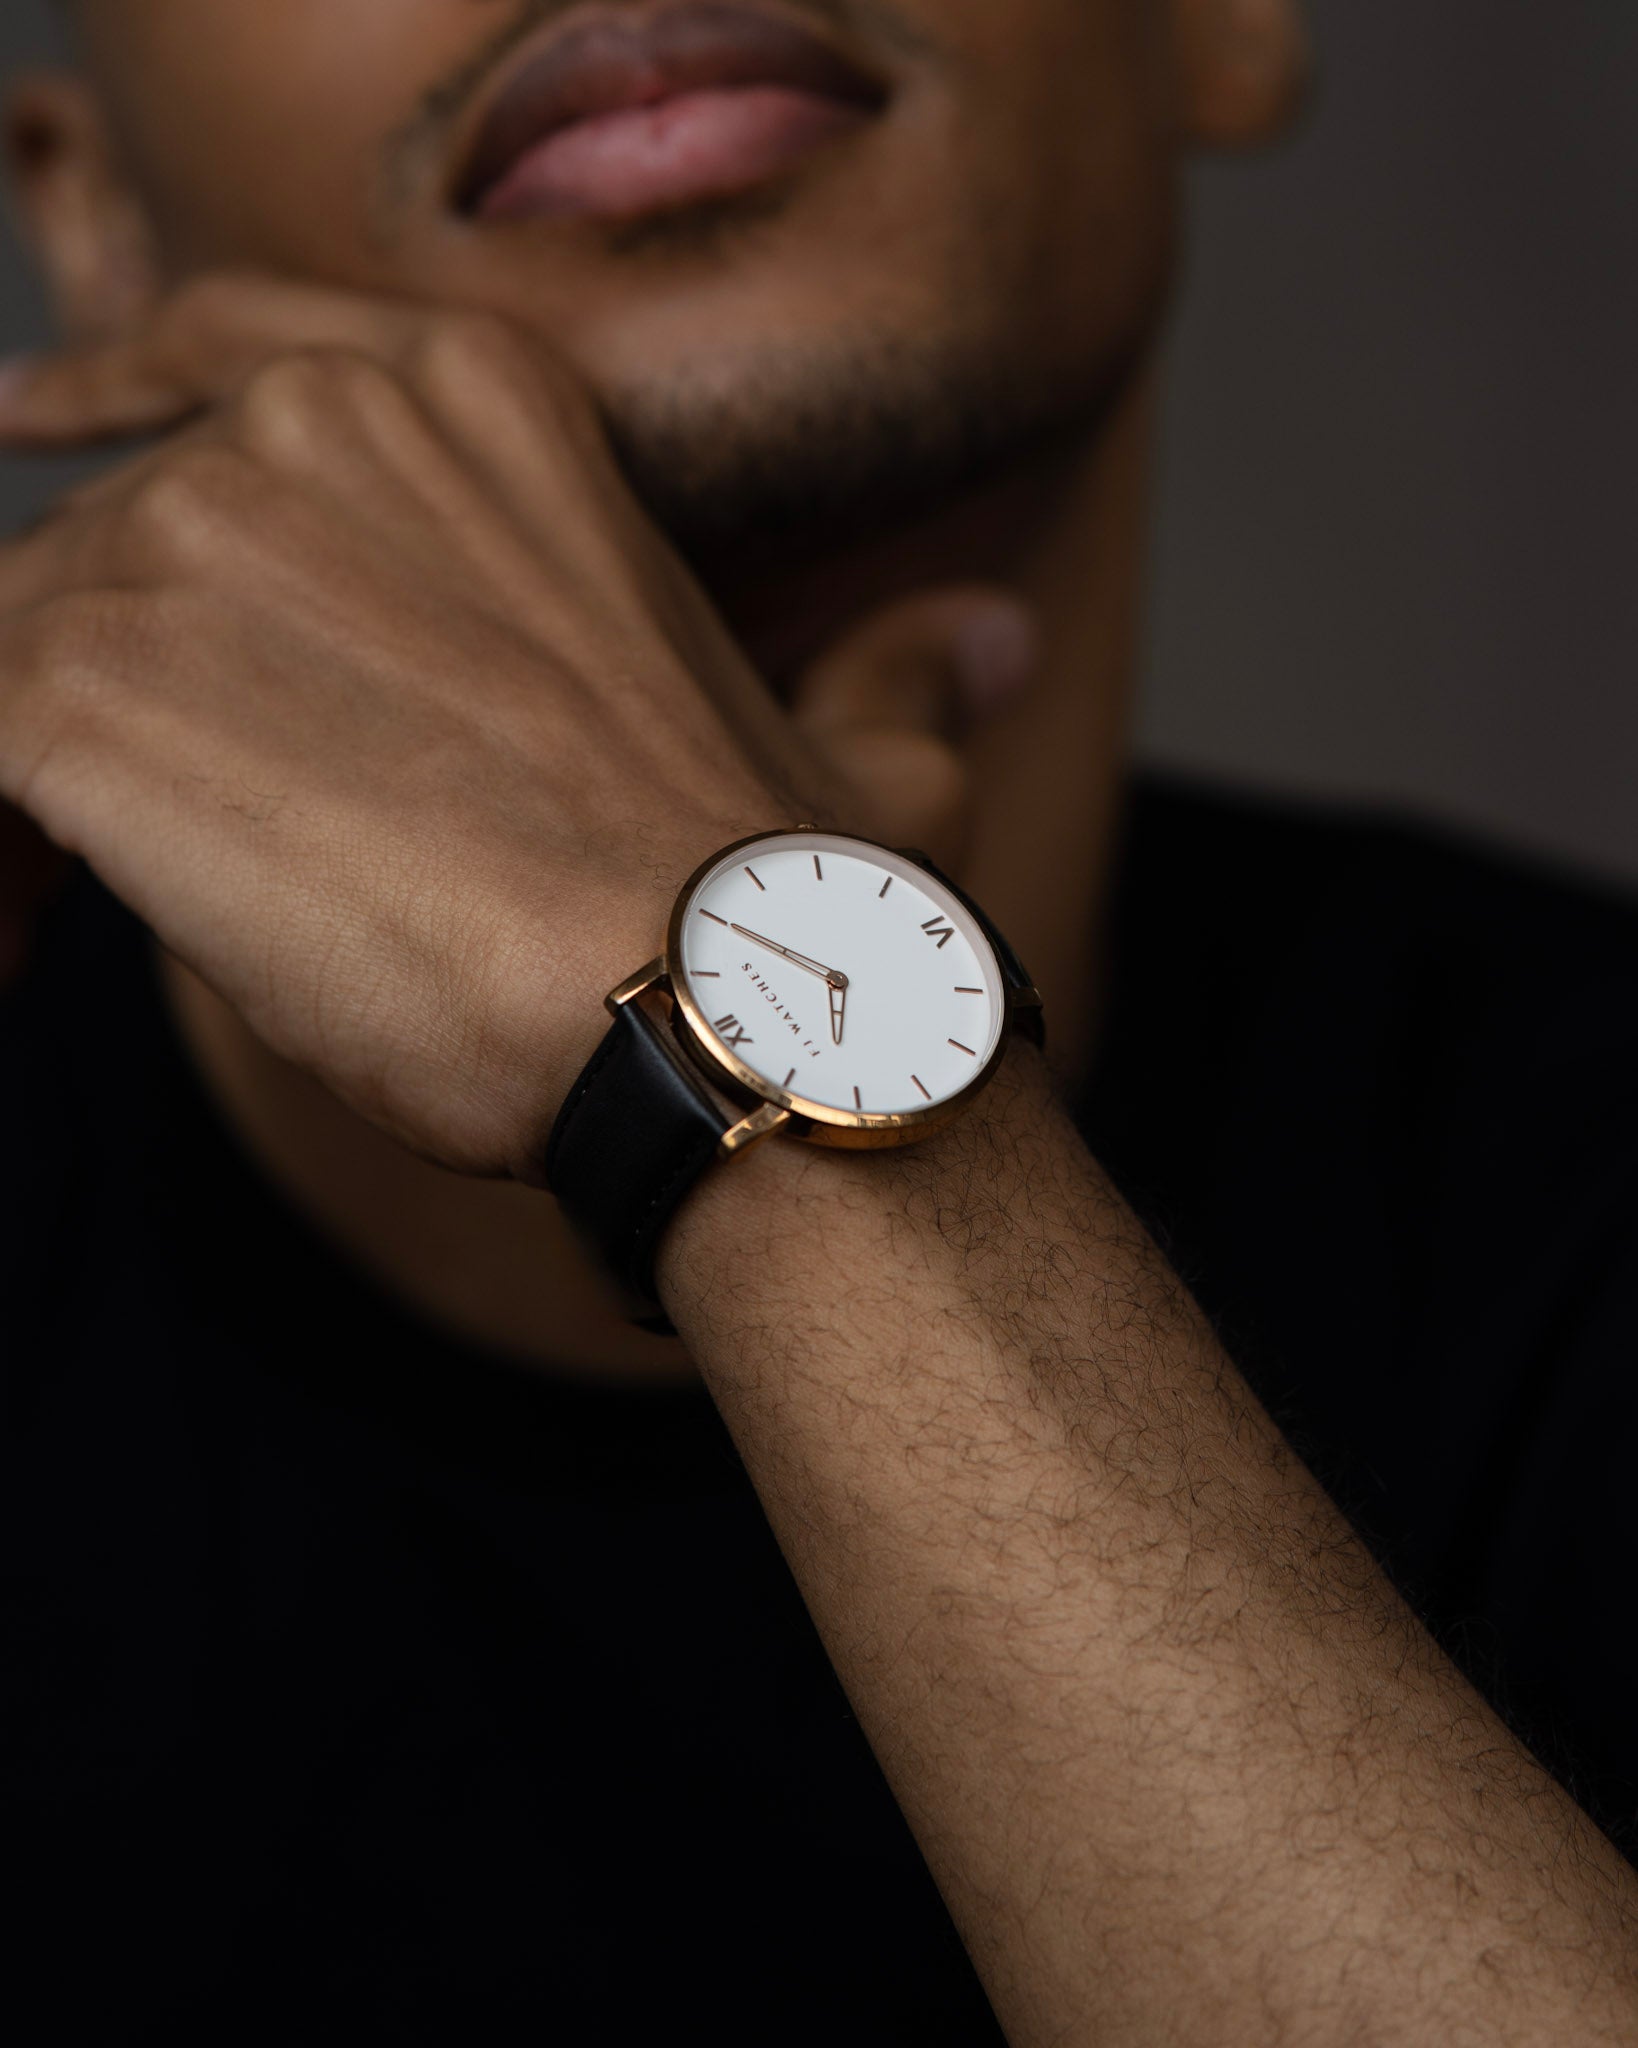 Discover Golden Sun, a 42 mm men's watch from Five Jwlry with a white and rose gold dial. This one can be paired with a wide variety of leather colors, such as black, red, navy blue, gray, tan, brown, olive green and beige!